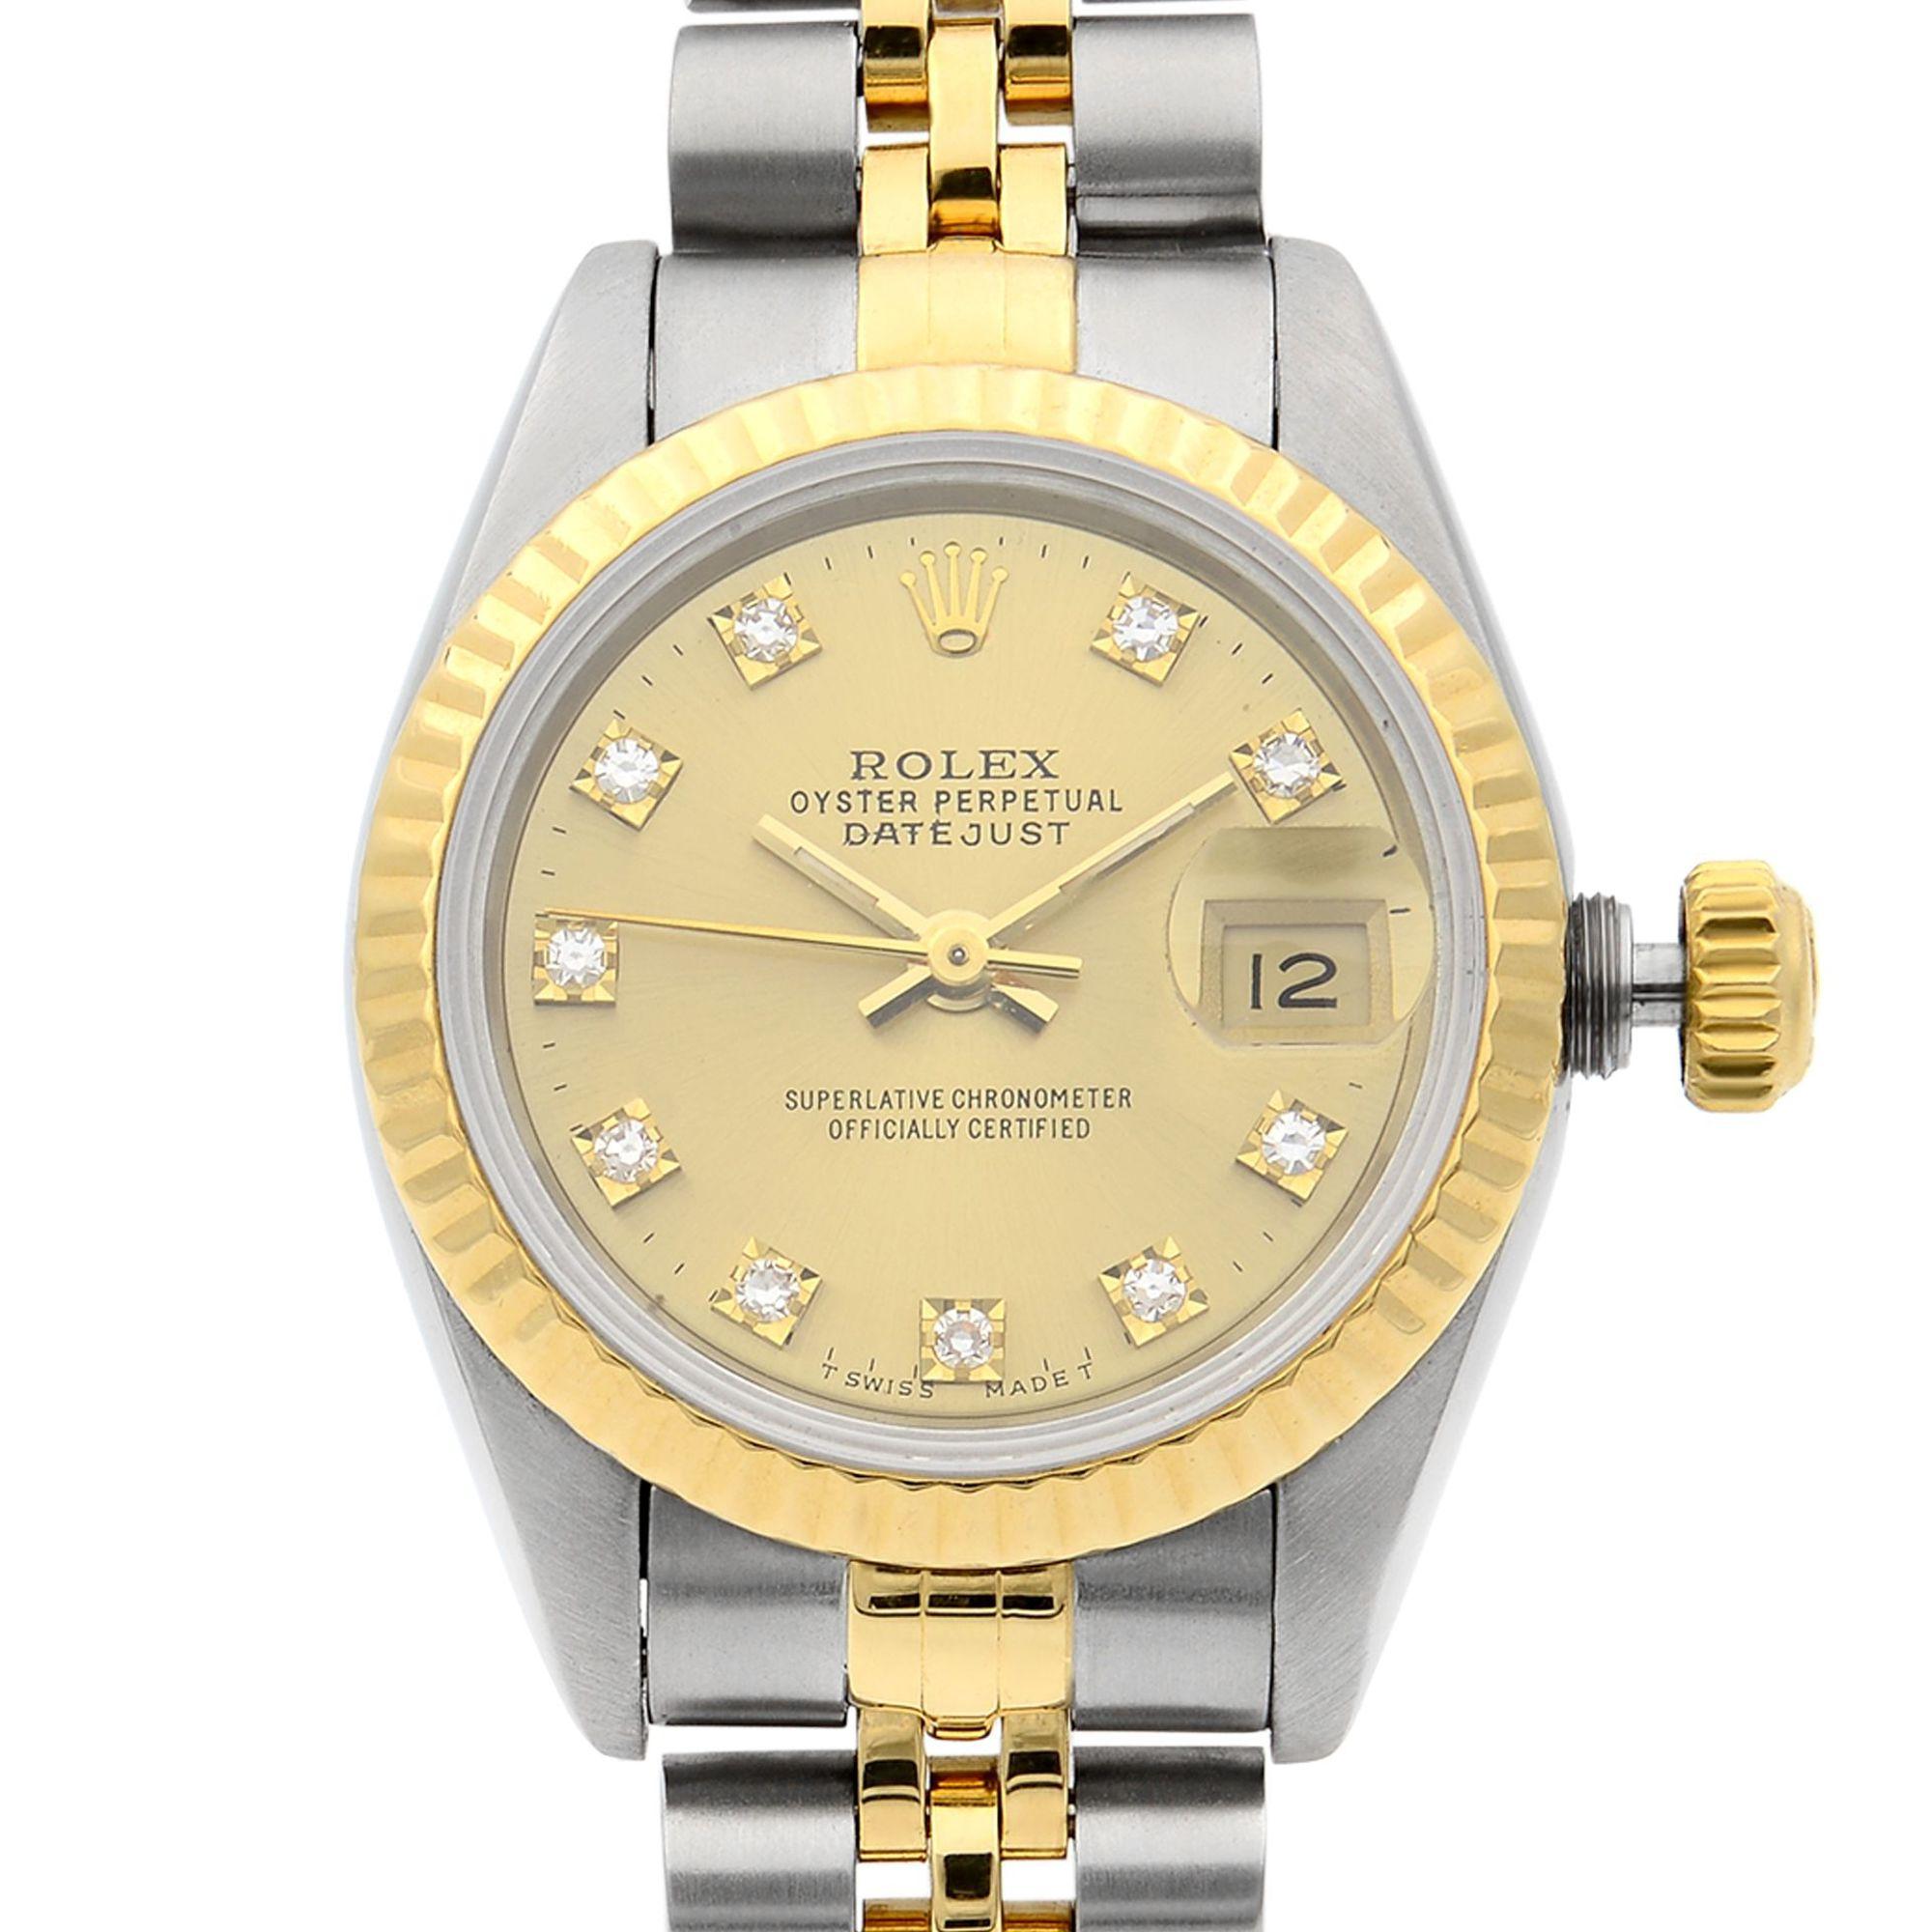 Pre Owned. No Original Box and Papers are Included. Comes with a Chronostore Presentation Box and Authenticity Card. Covered by 1-year Chronostore Warranty.


Details:
Brand Rolex
Department Women
Model Number 69173
Country/Region of Manufacture